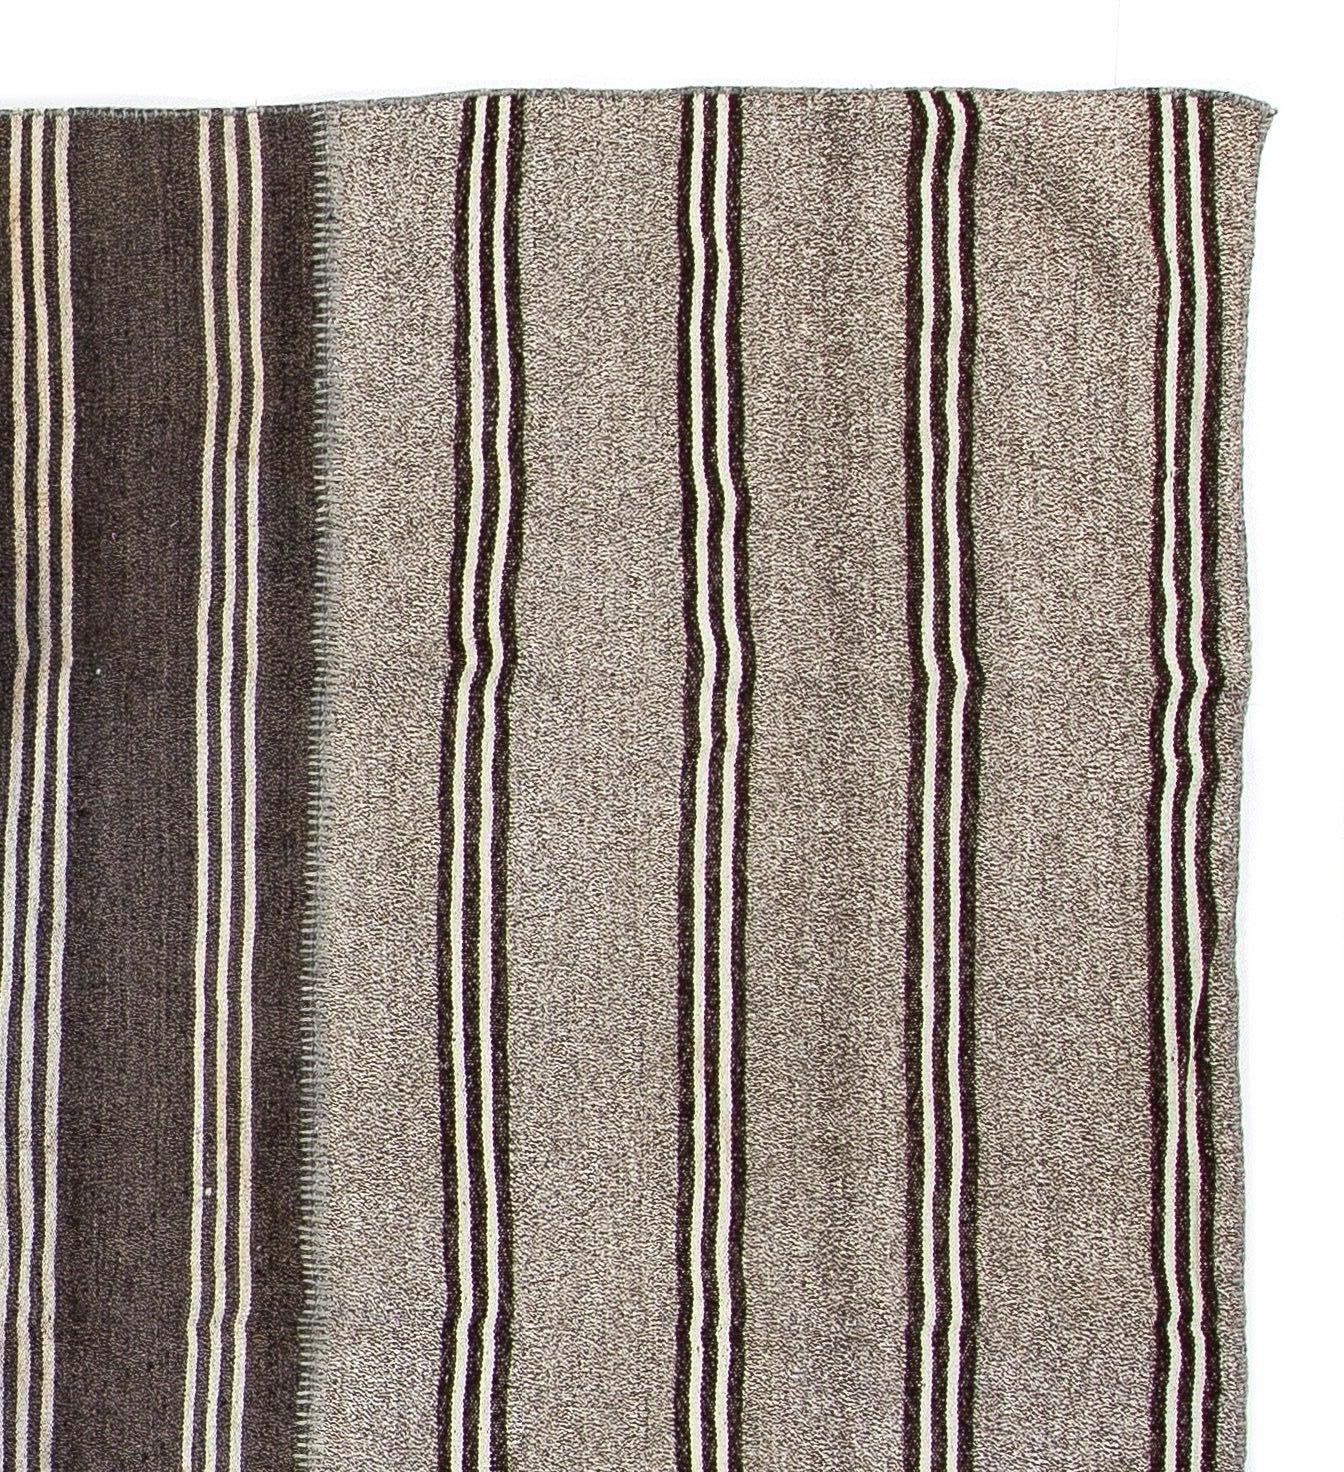 Goat Hair 9.2x15 Ft Large Striped Hand-Woven Kilim, Vintage Turkish Flat Weave Rug For Sale